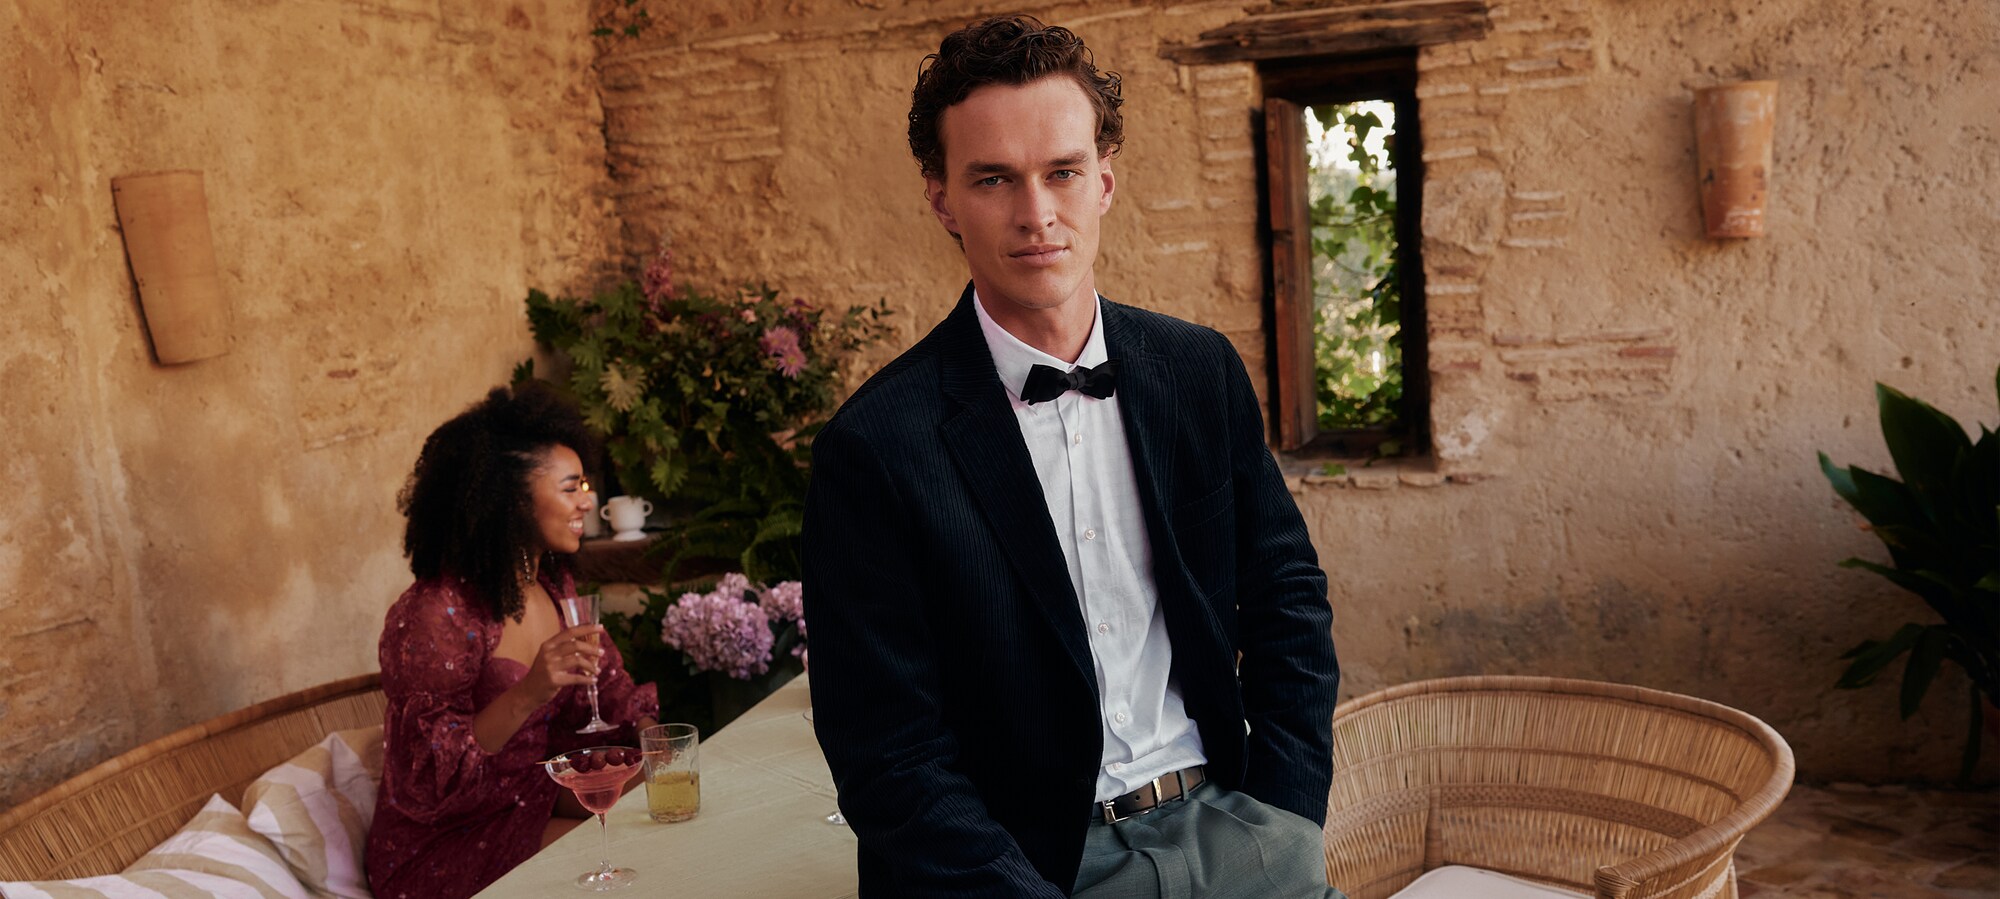 Your guide to style Wedding guest dress codes for men